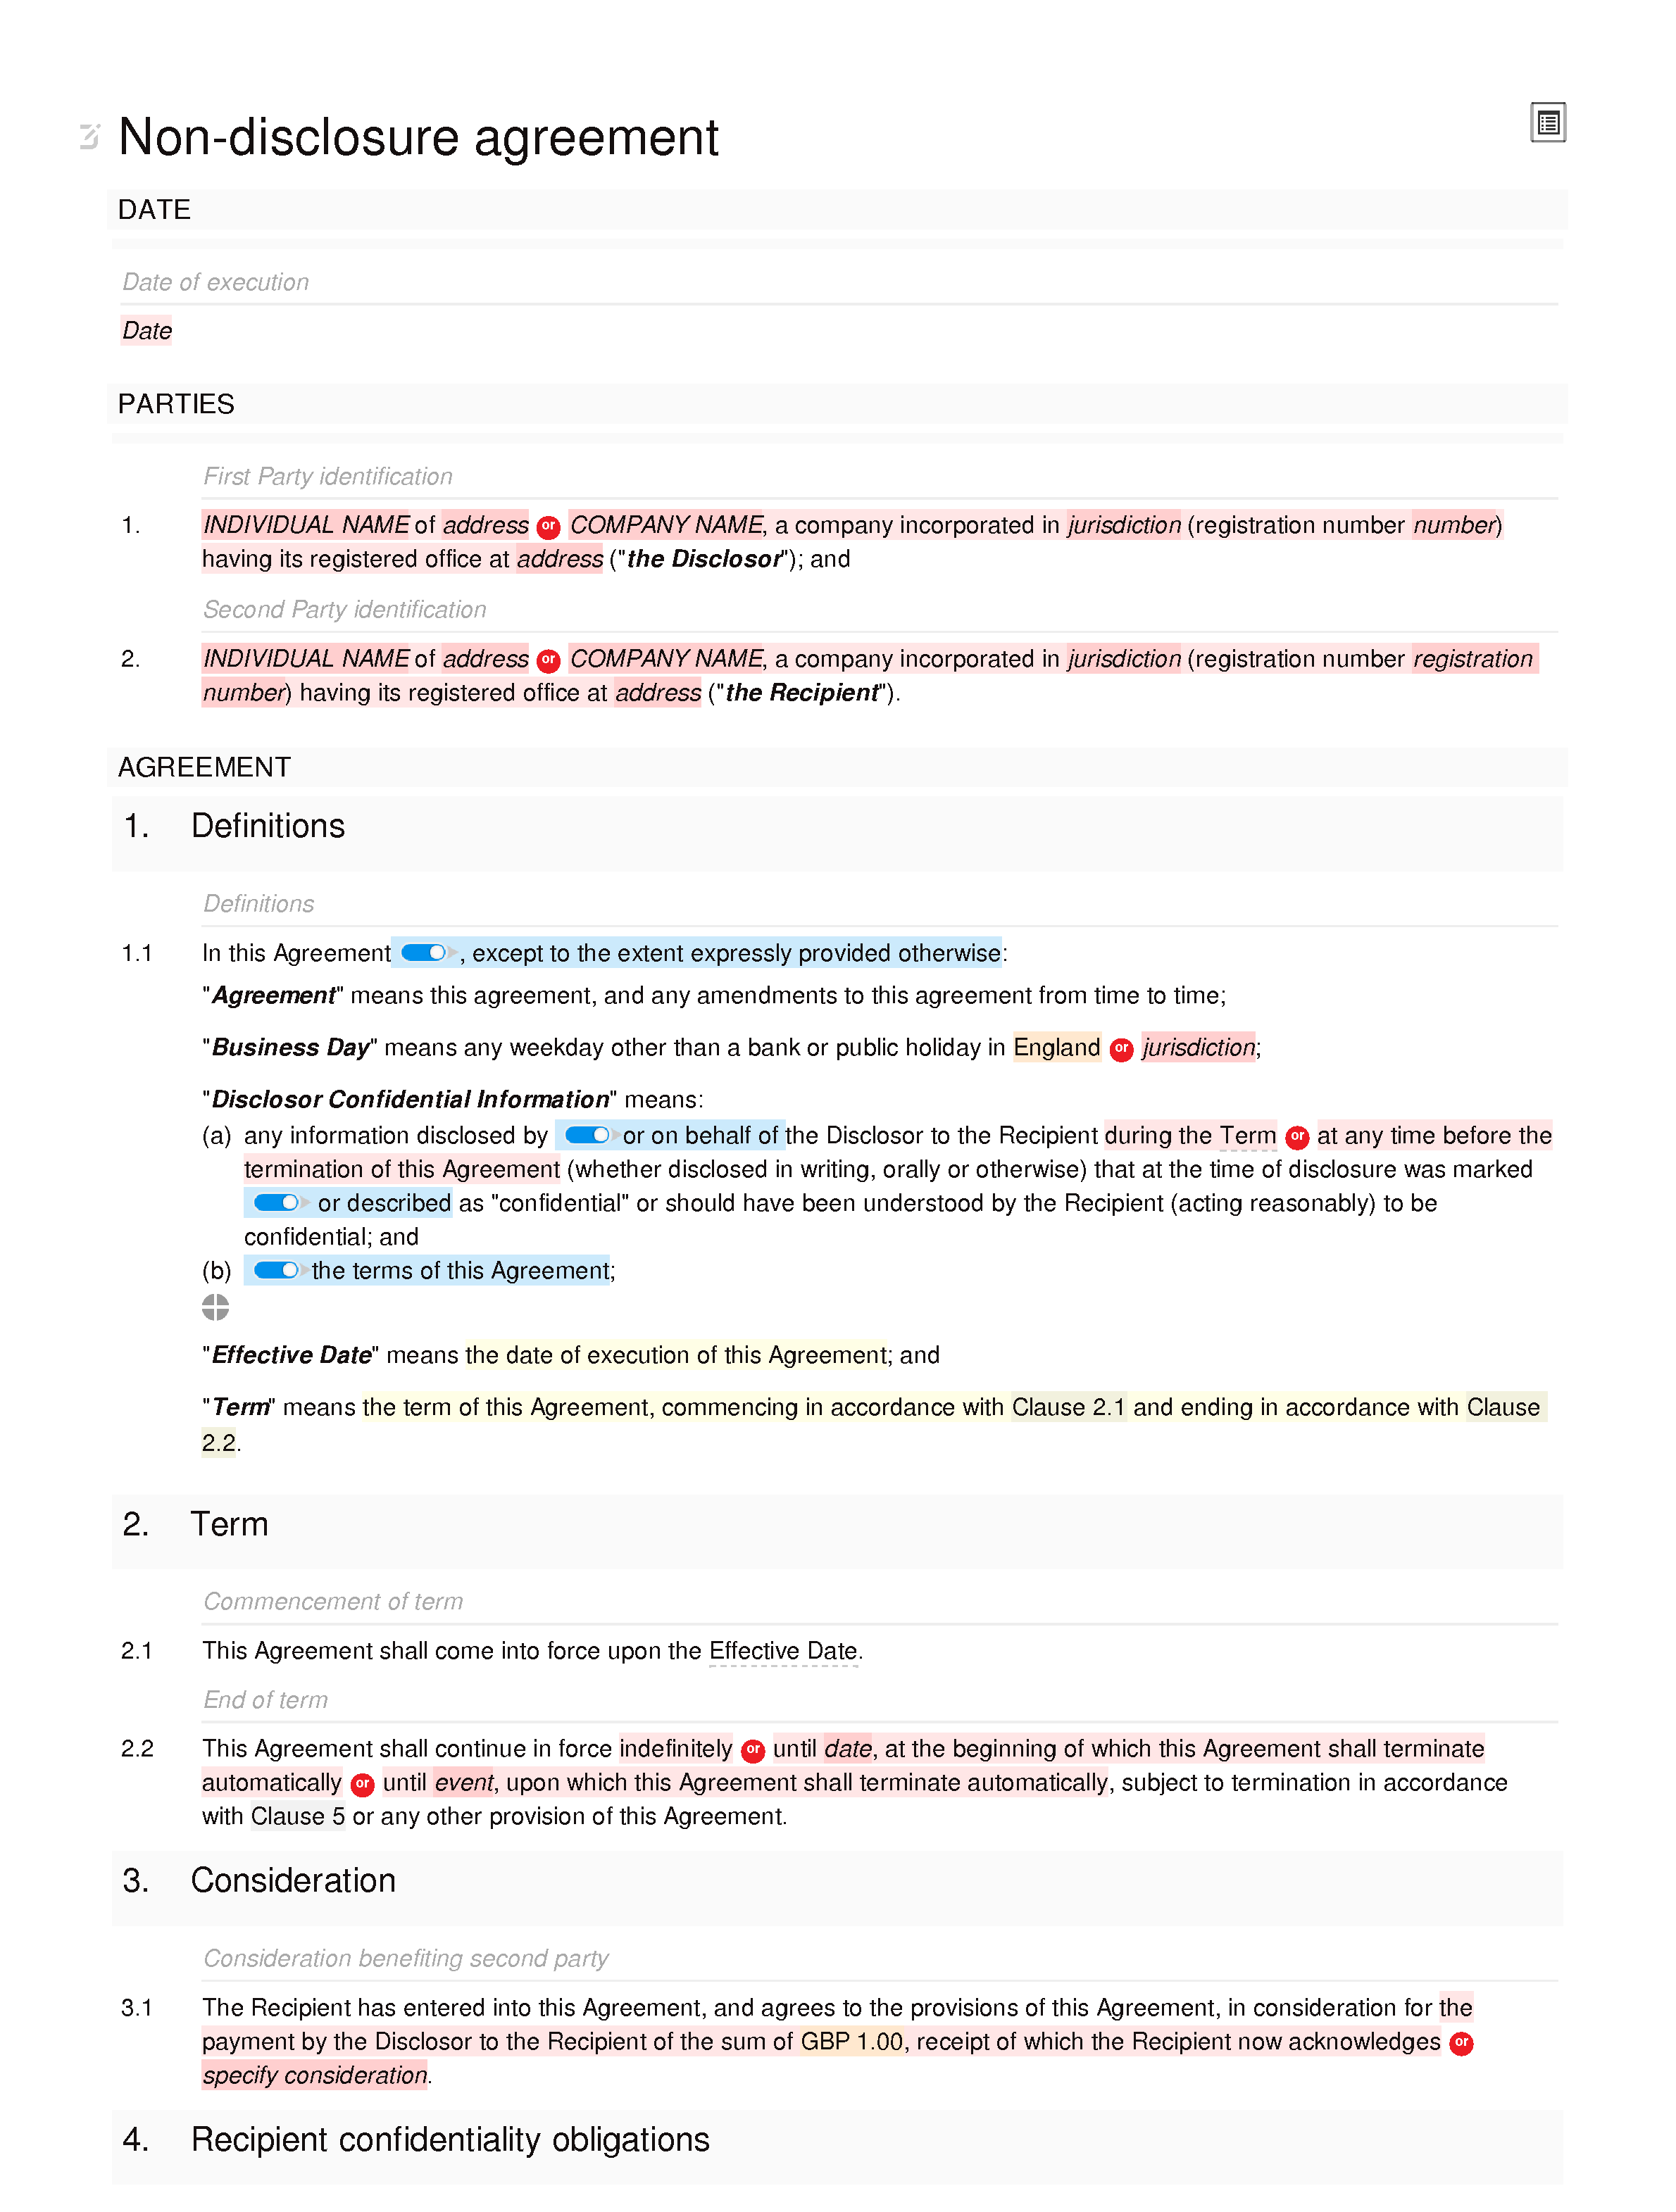 Non-disclosure agreement (unilateral, standard) document editor preview